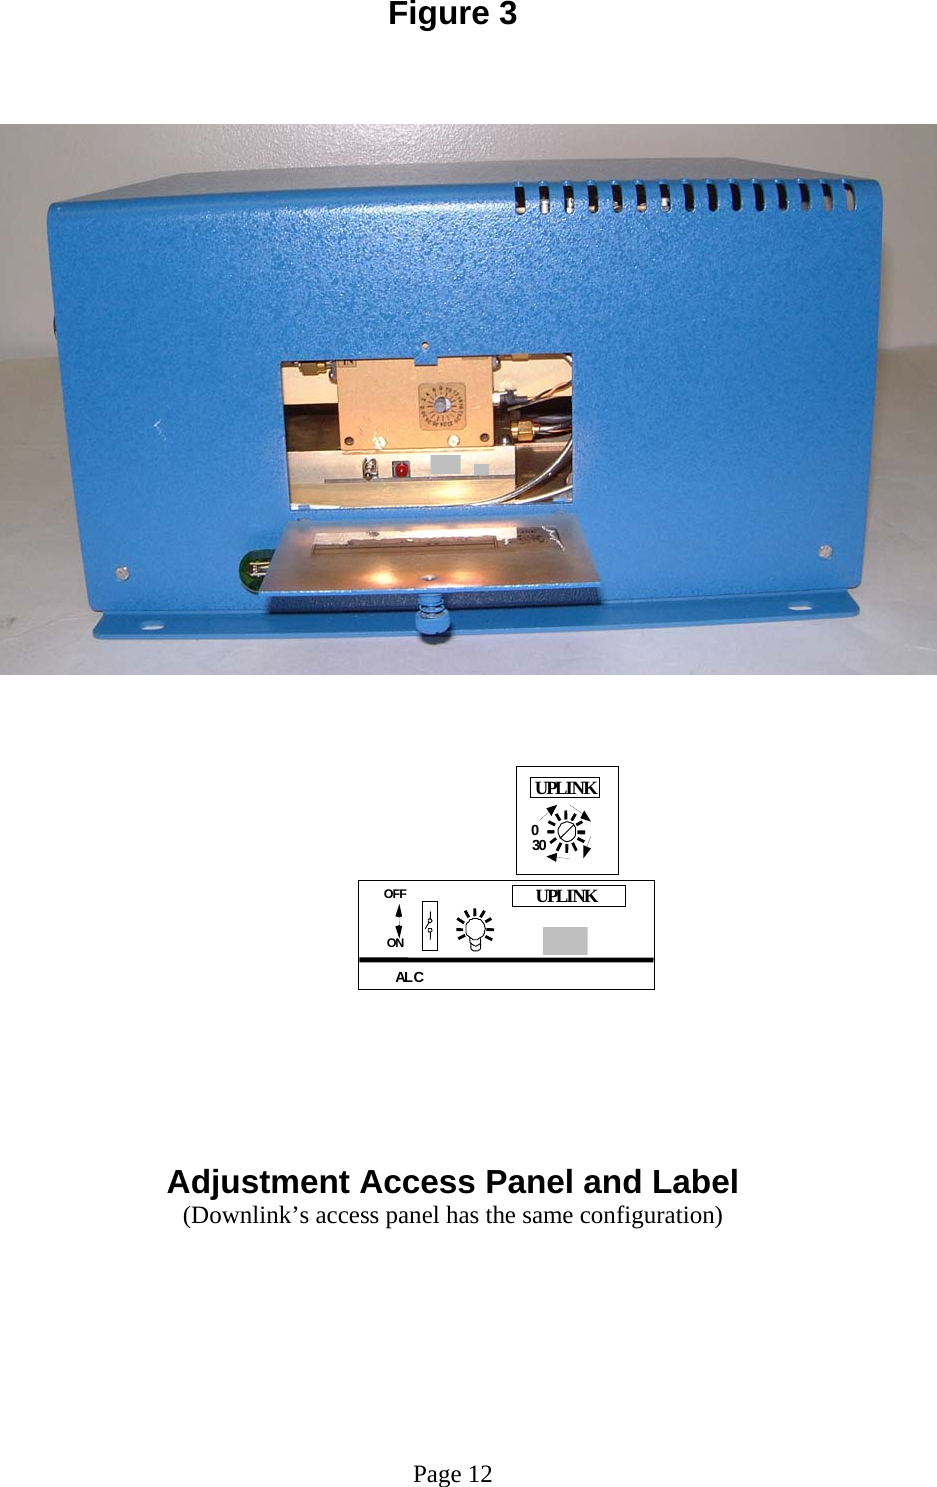 Figure 3           Adjustment Access Panel and Label (Downlink’s access panel has the same configuration)         Page 12 ALCUPLINKOFFON030UPLINK